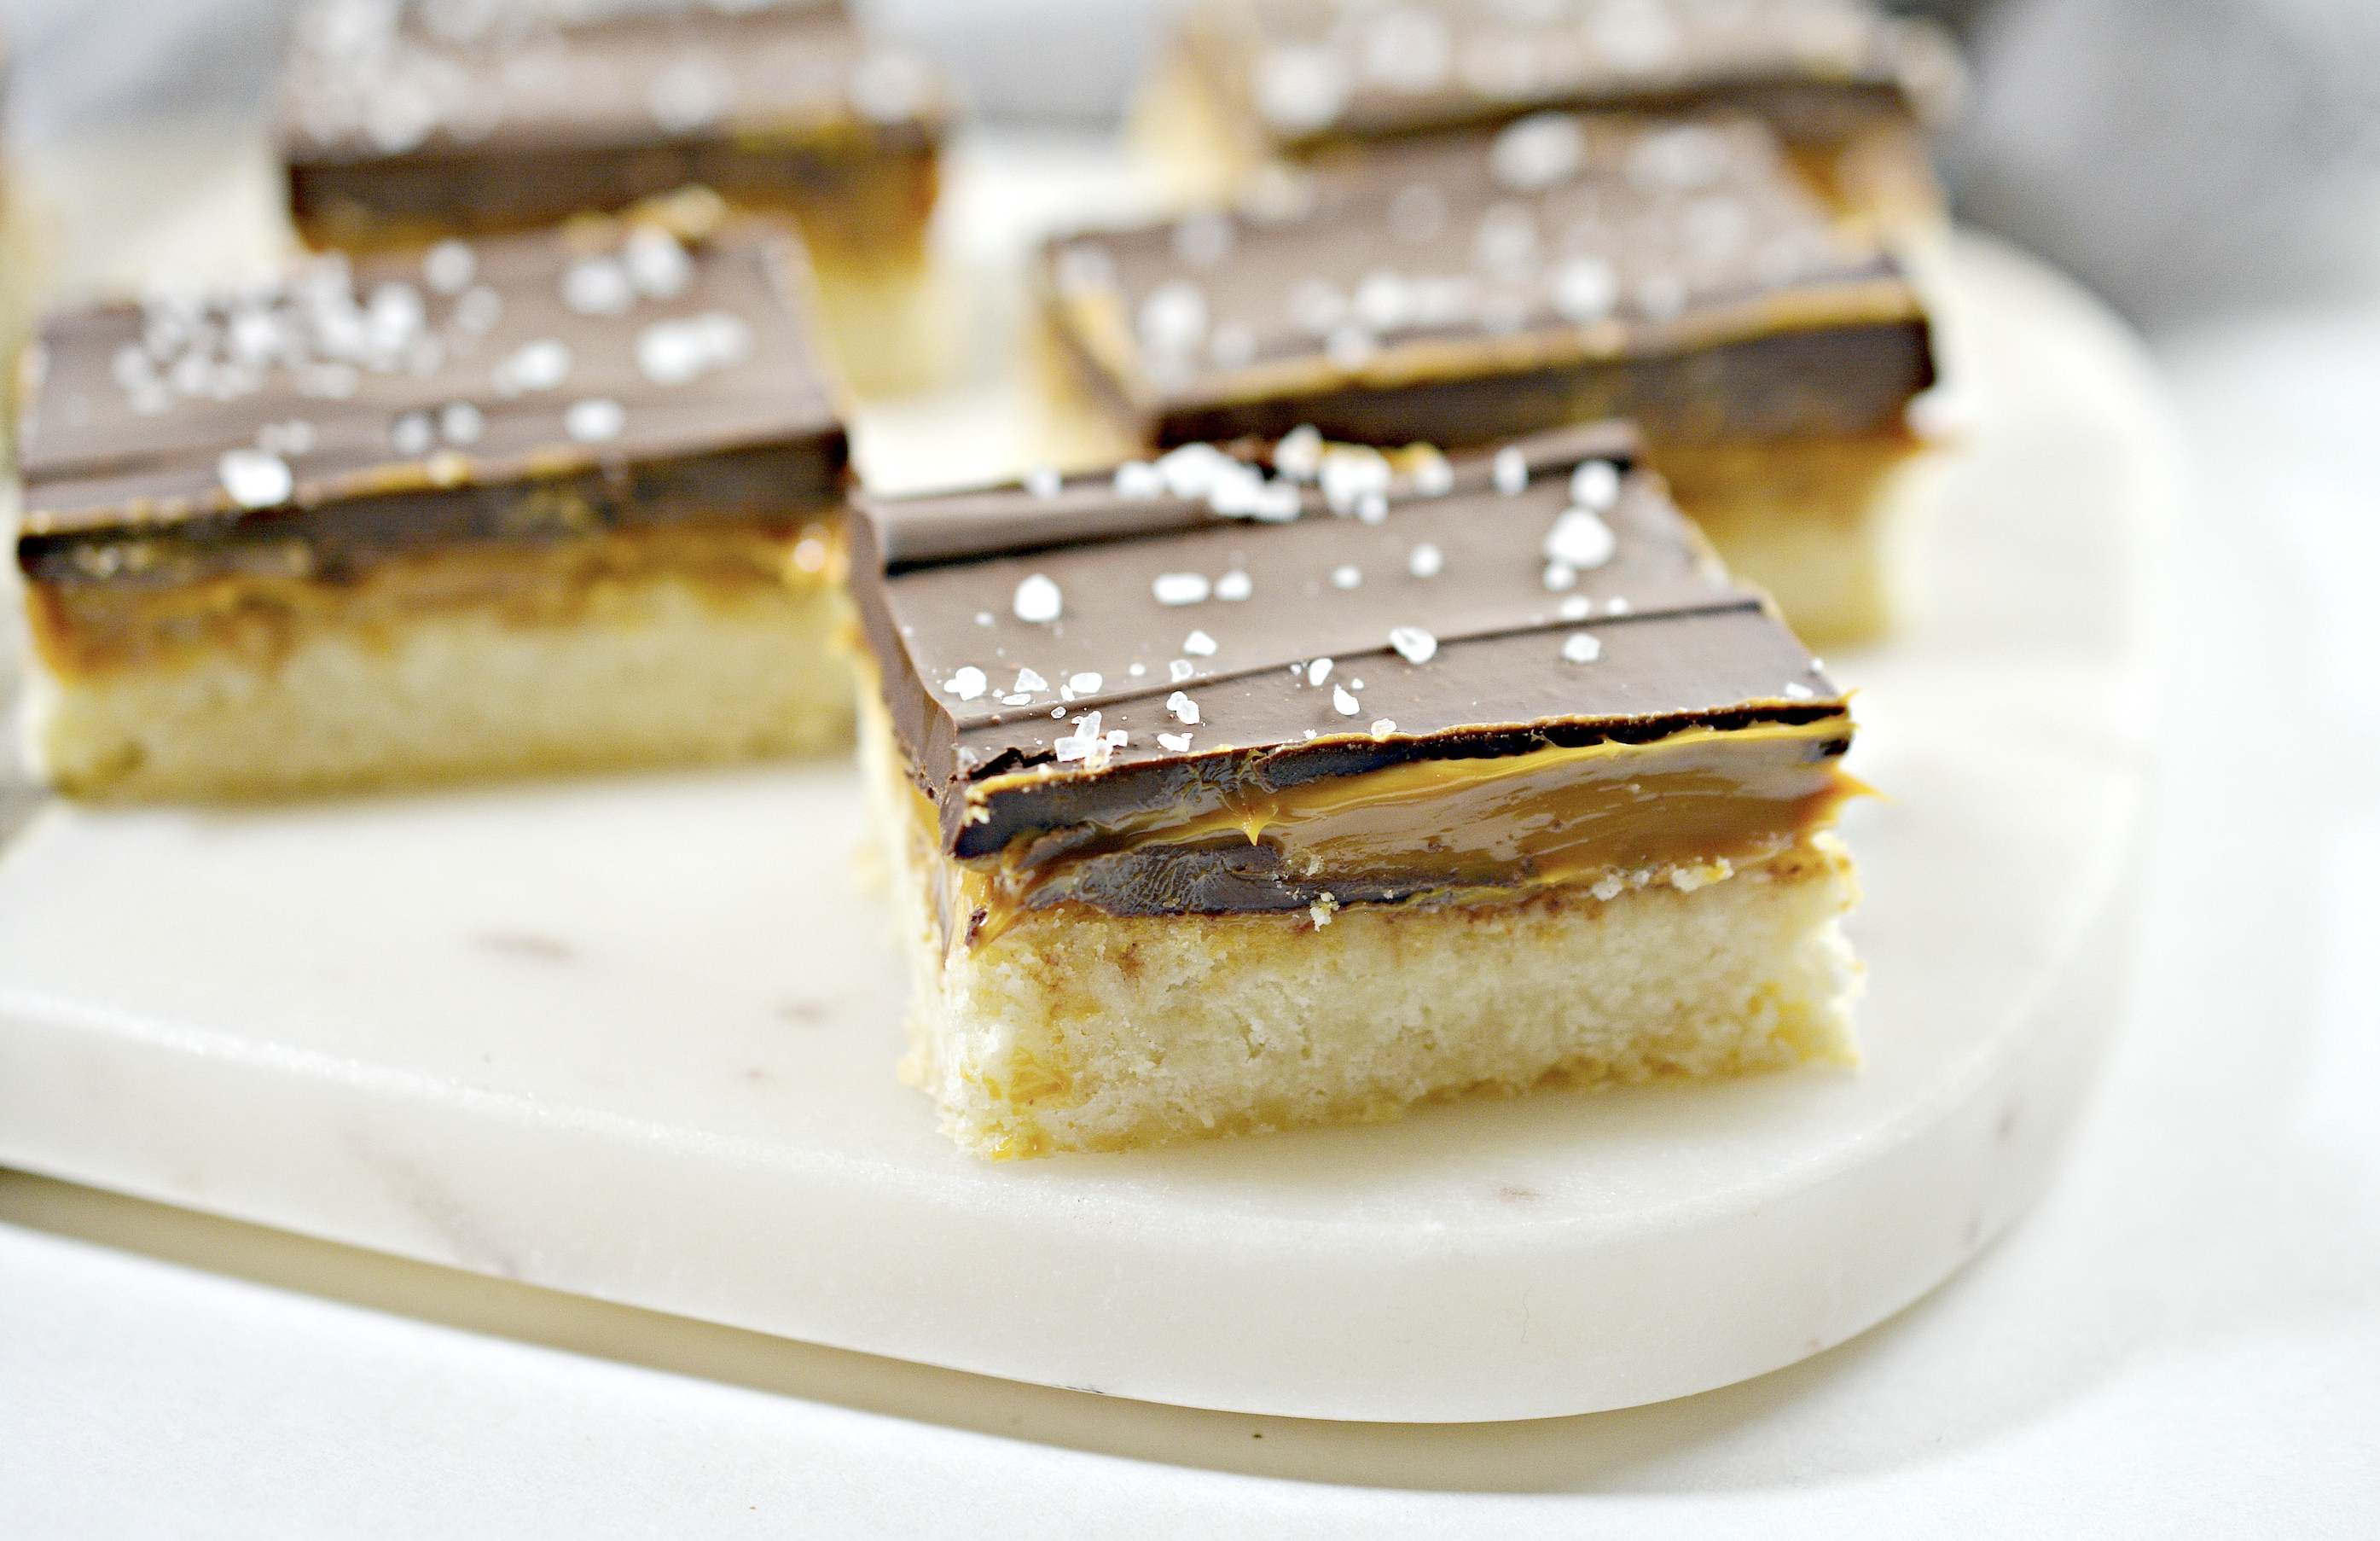 If you love chocolate and caramel, you’ll love this easy Caramel Slice recipe made with AMERICAN HERITAGE Finely Grated Baking Chocolate! #ad #baking #familybaking #bakingguide @Chochistory 